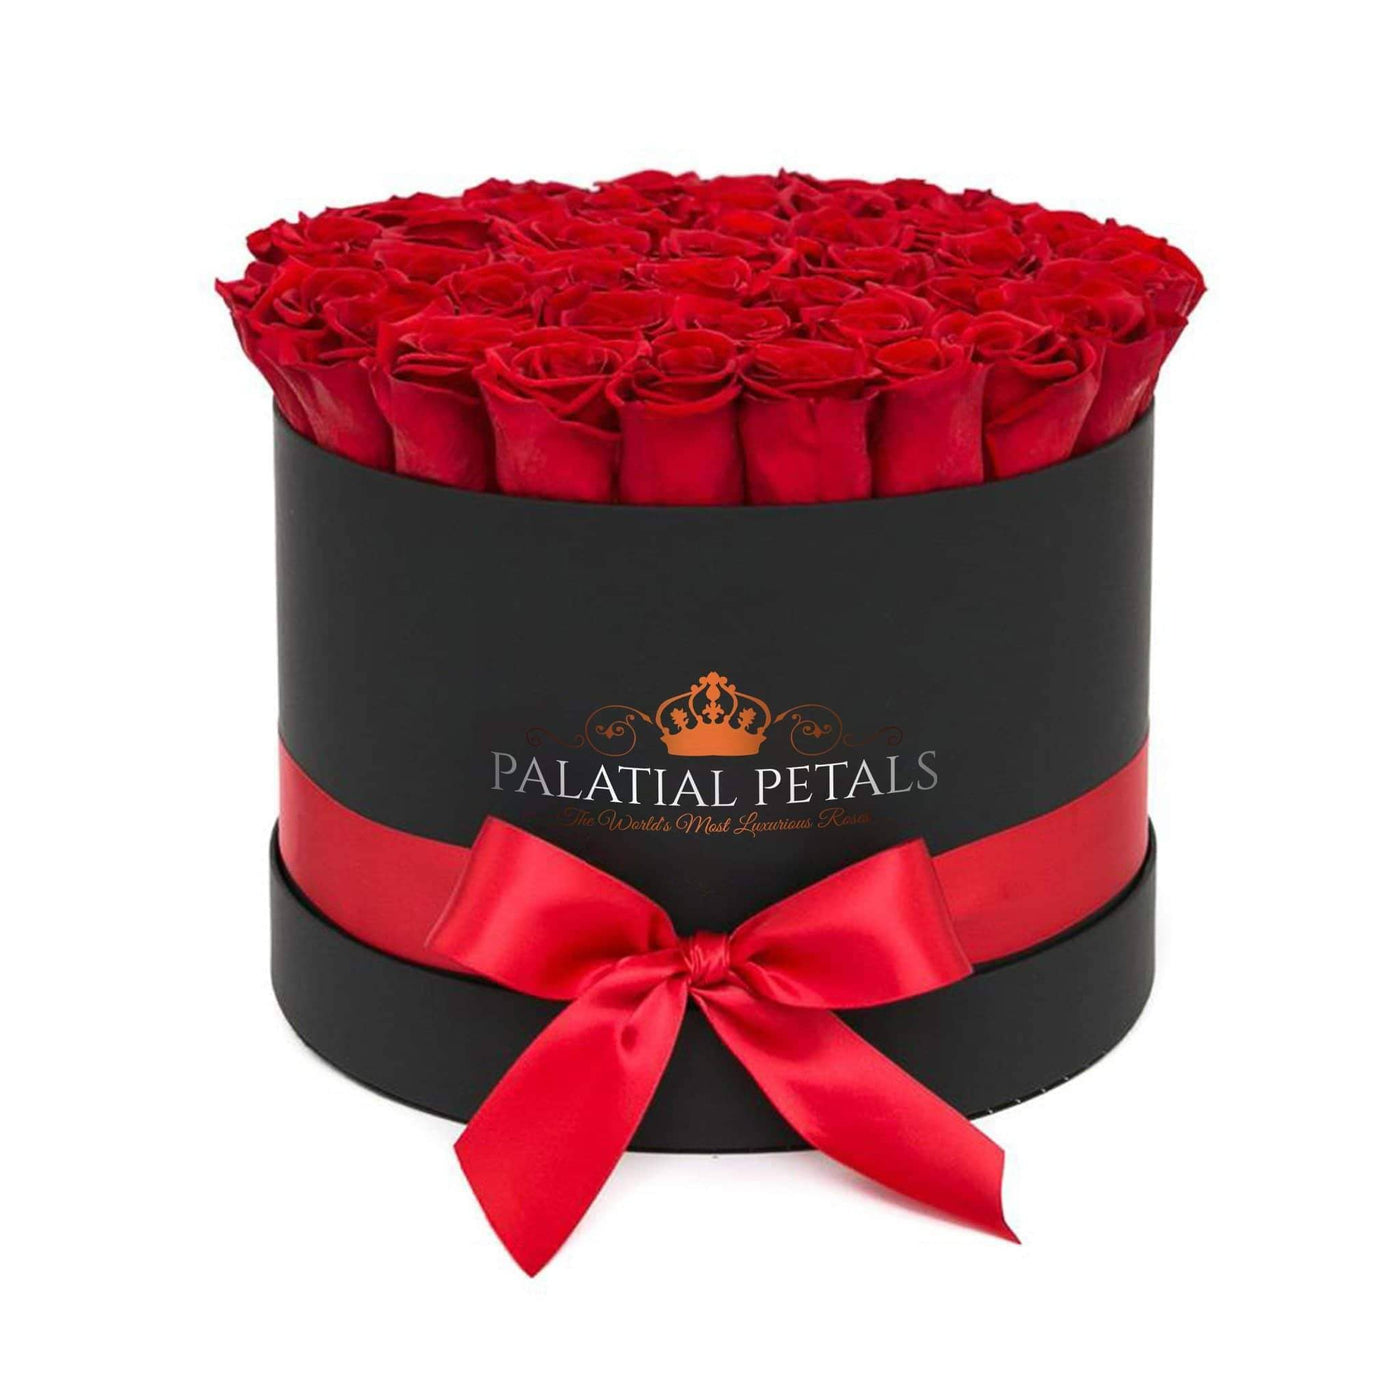 Louboutin Red Roses That Last A Year - Grande Rose Box